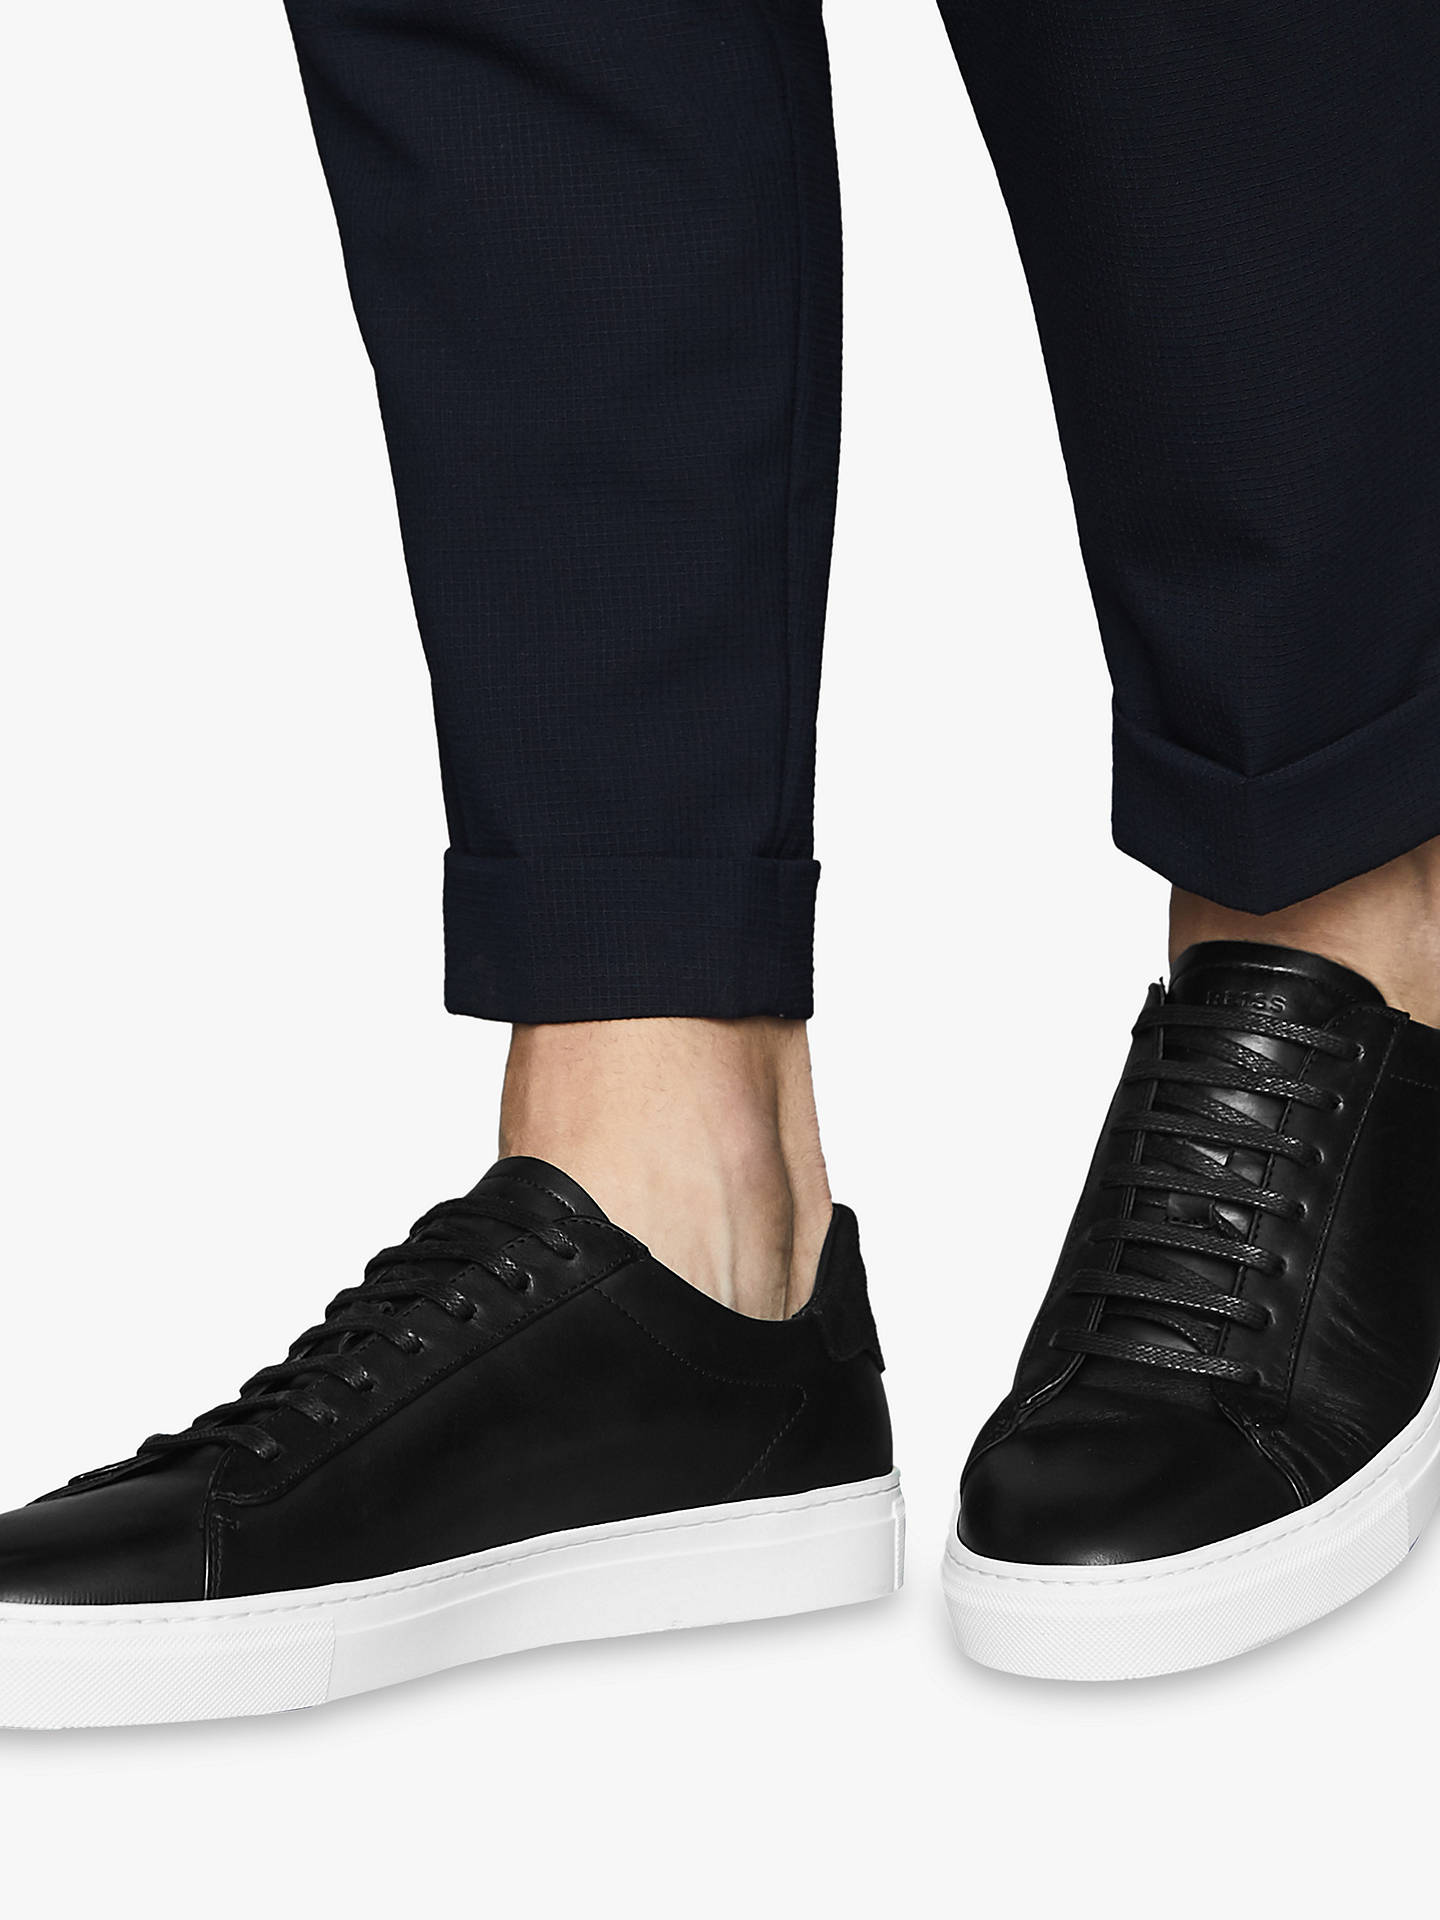 Reiss Finley Leather Trainers, Black at John Lewis & Partners